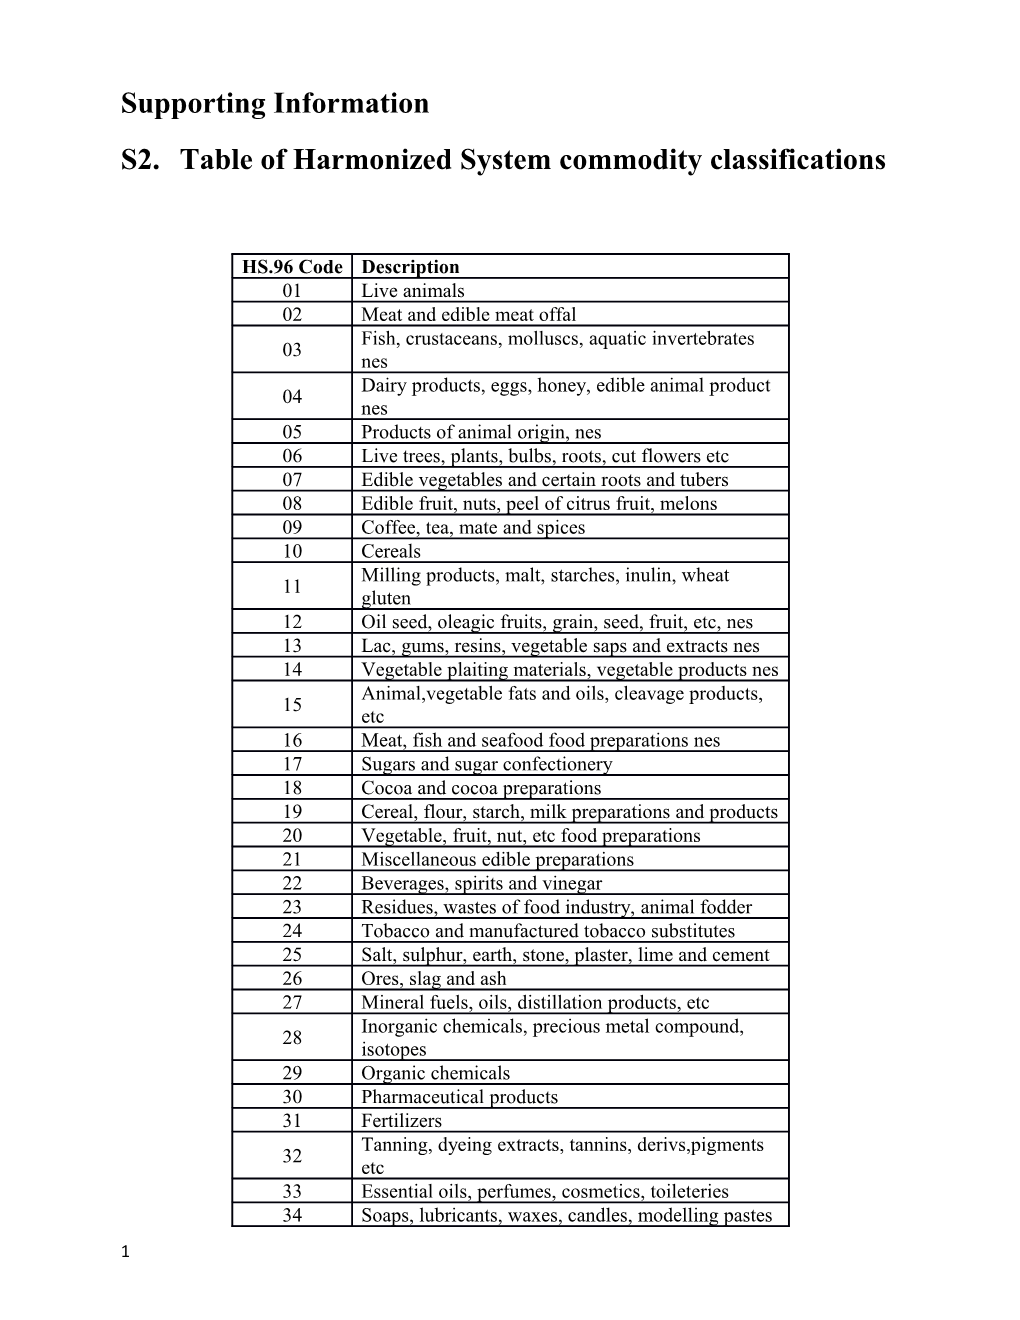 S2.Table of Harmonized System Commodity Classifications